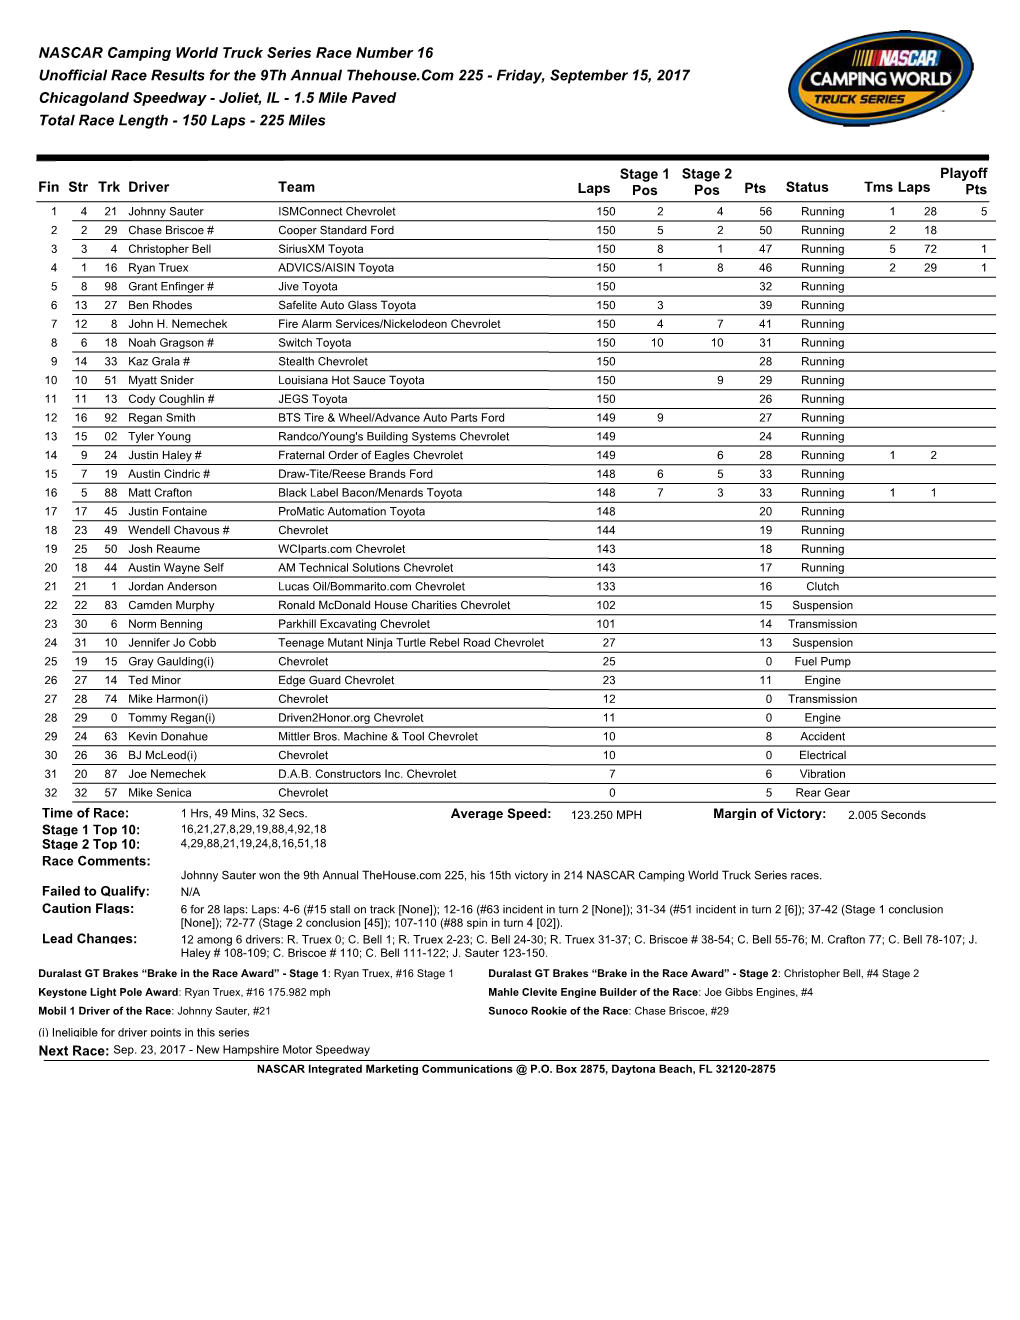 NASCAR Camping World Truck Series Race Number 16 Unofficial